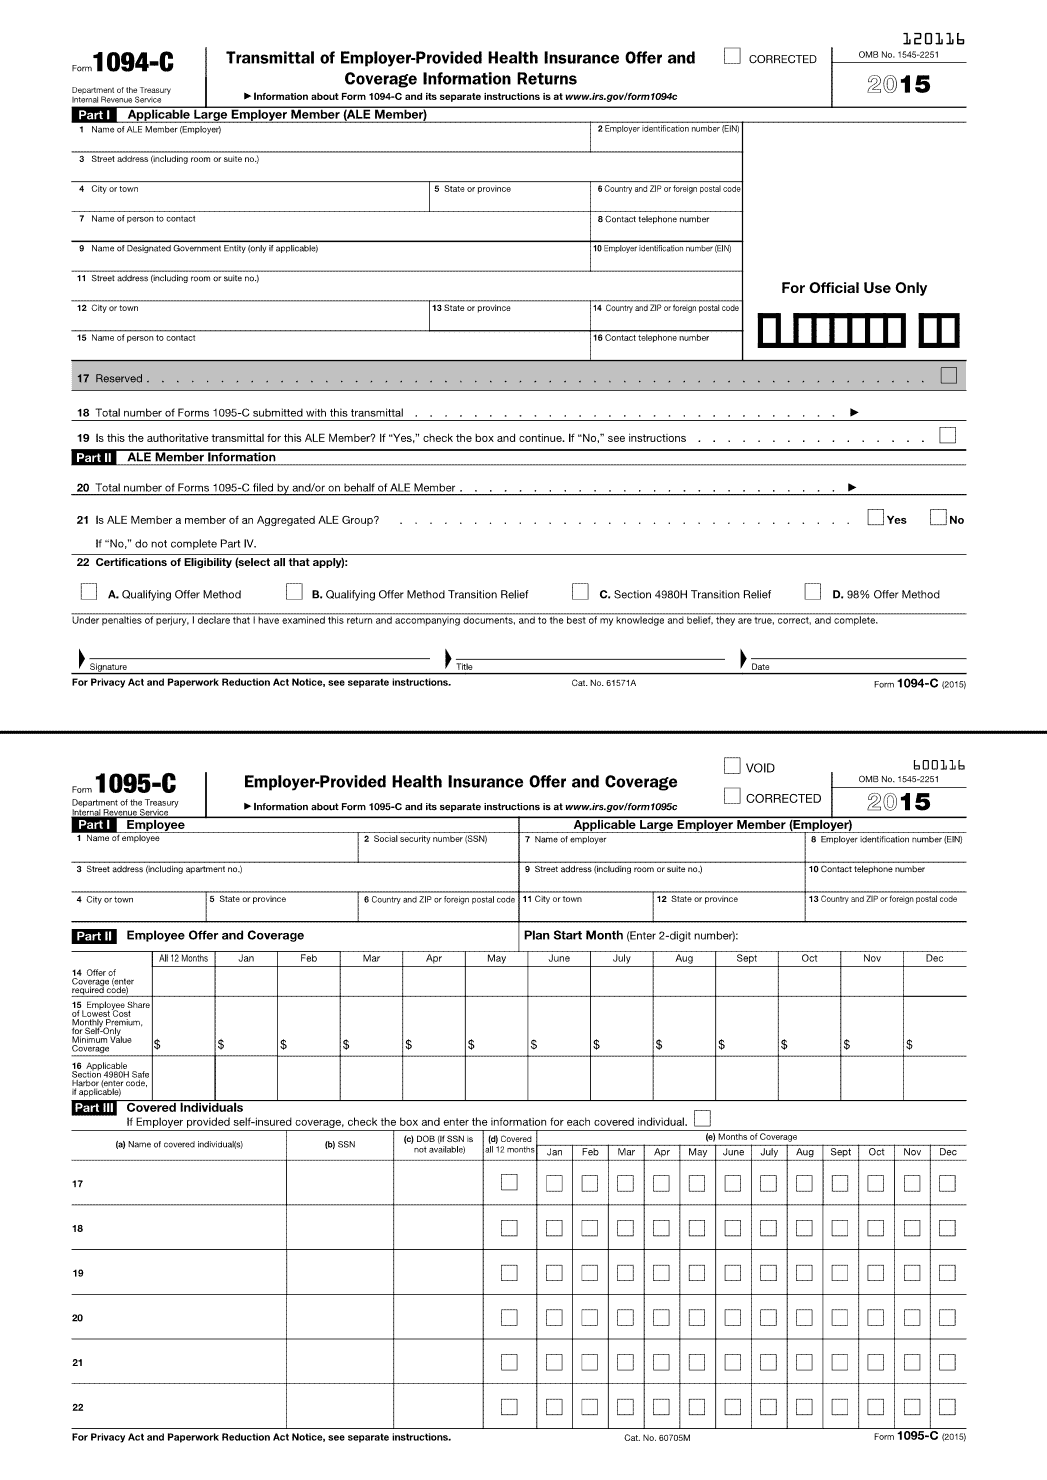 1094-C and 1095-C Form